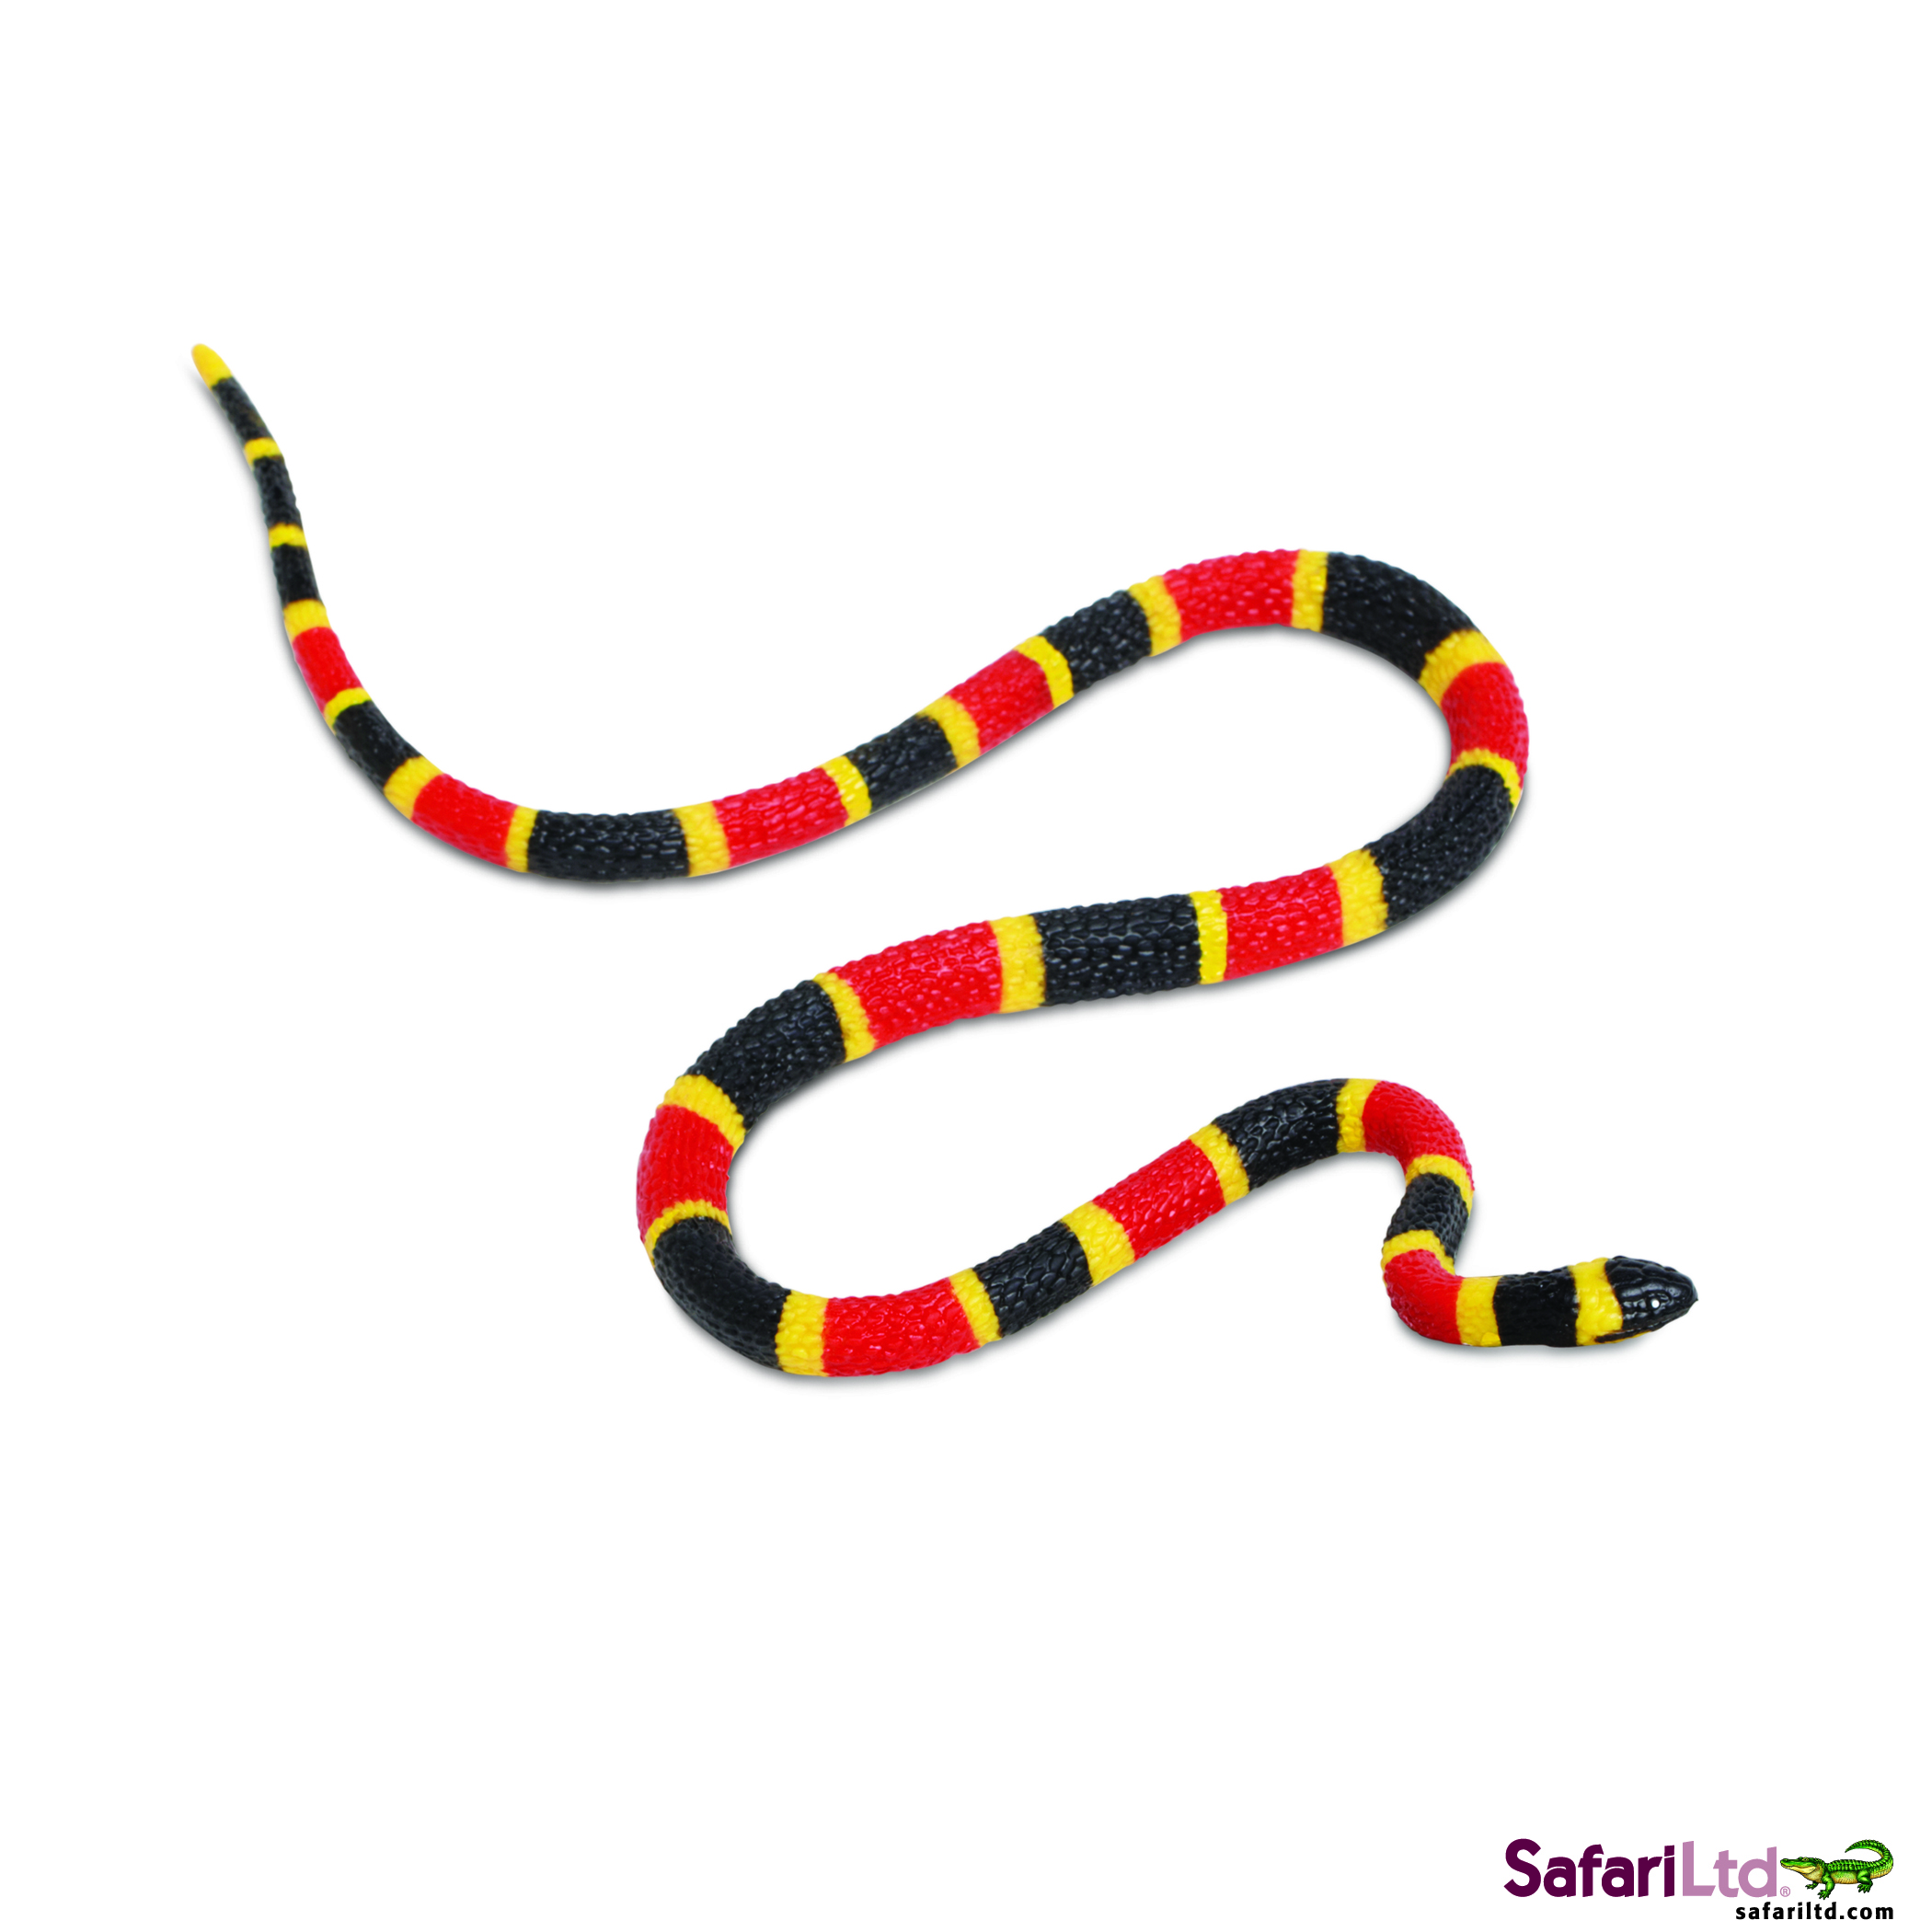 Snake clipart free clipart images 2 clipartix 2